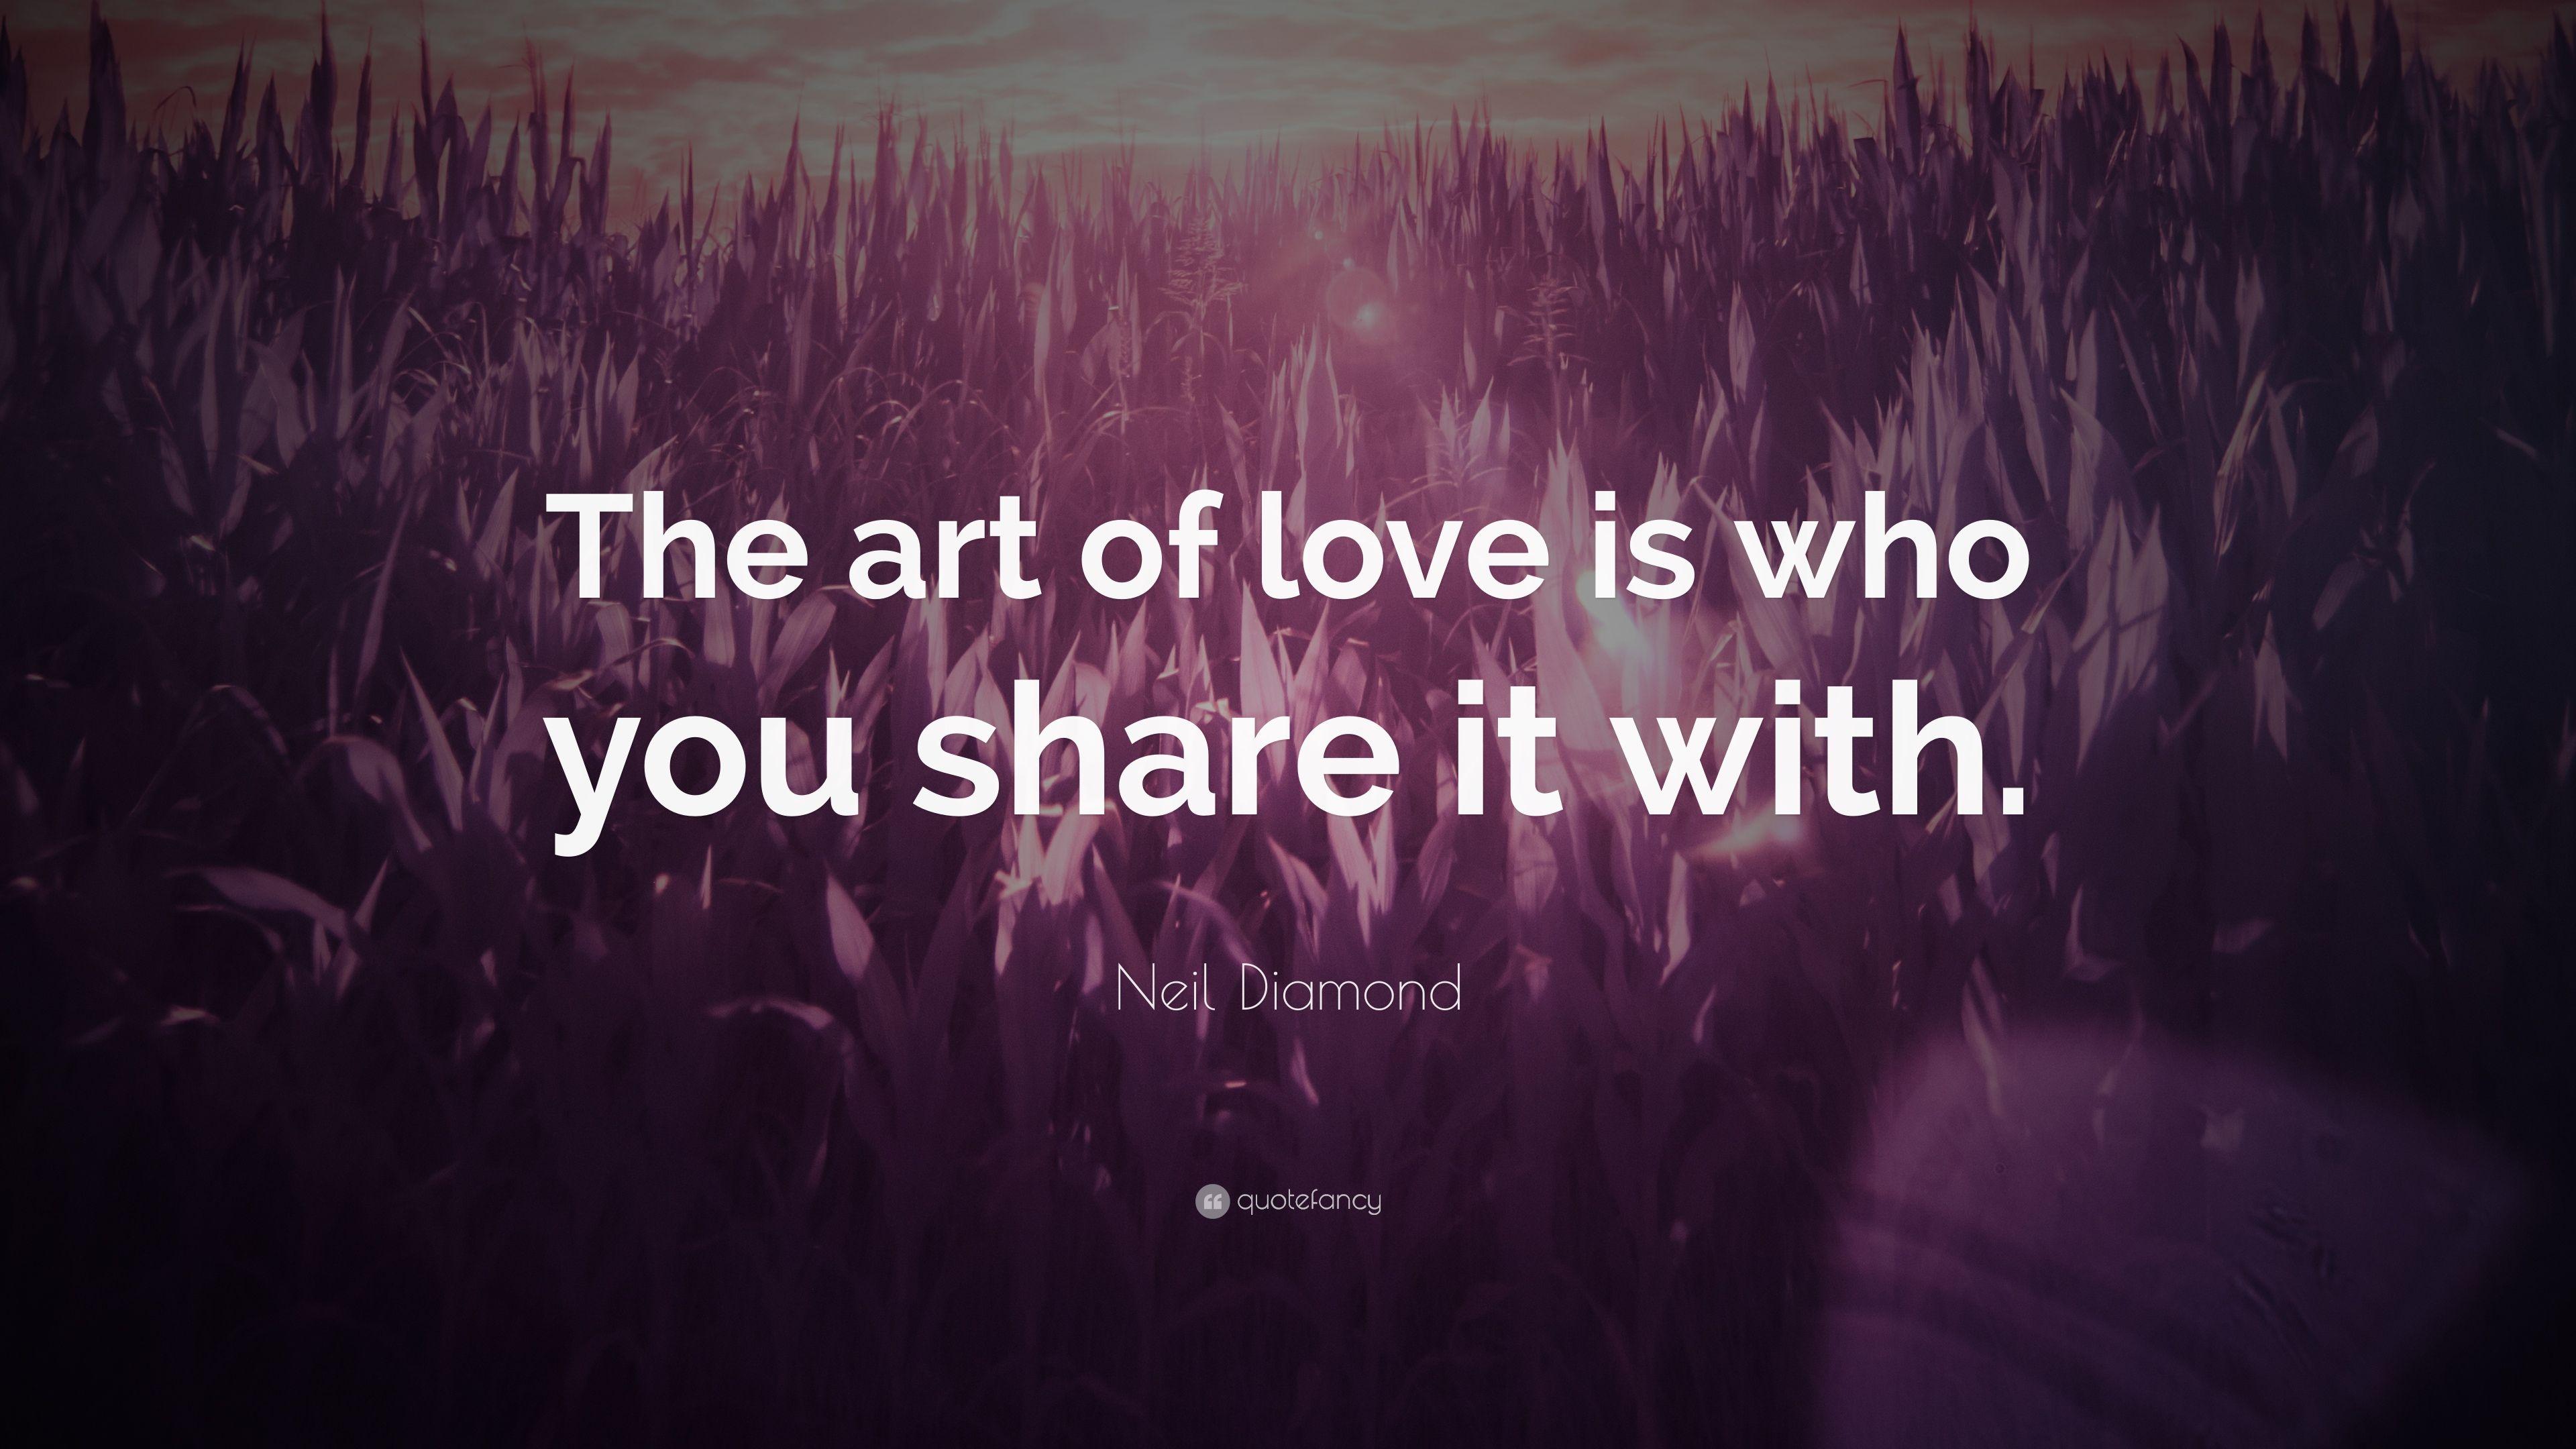 Neil Diamond Quote: “The art of love is who you share it